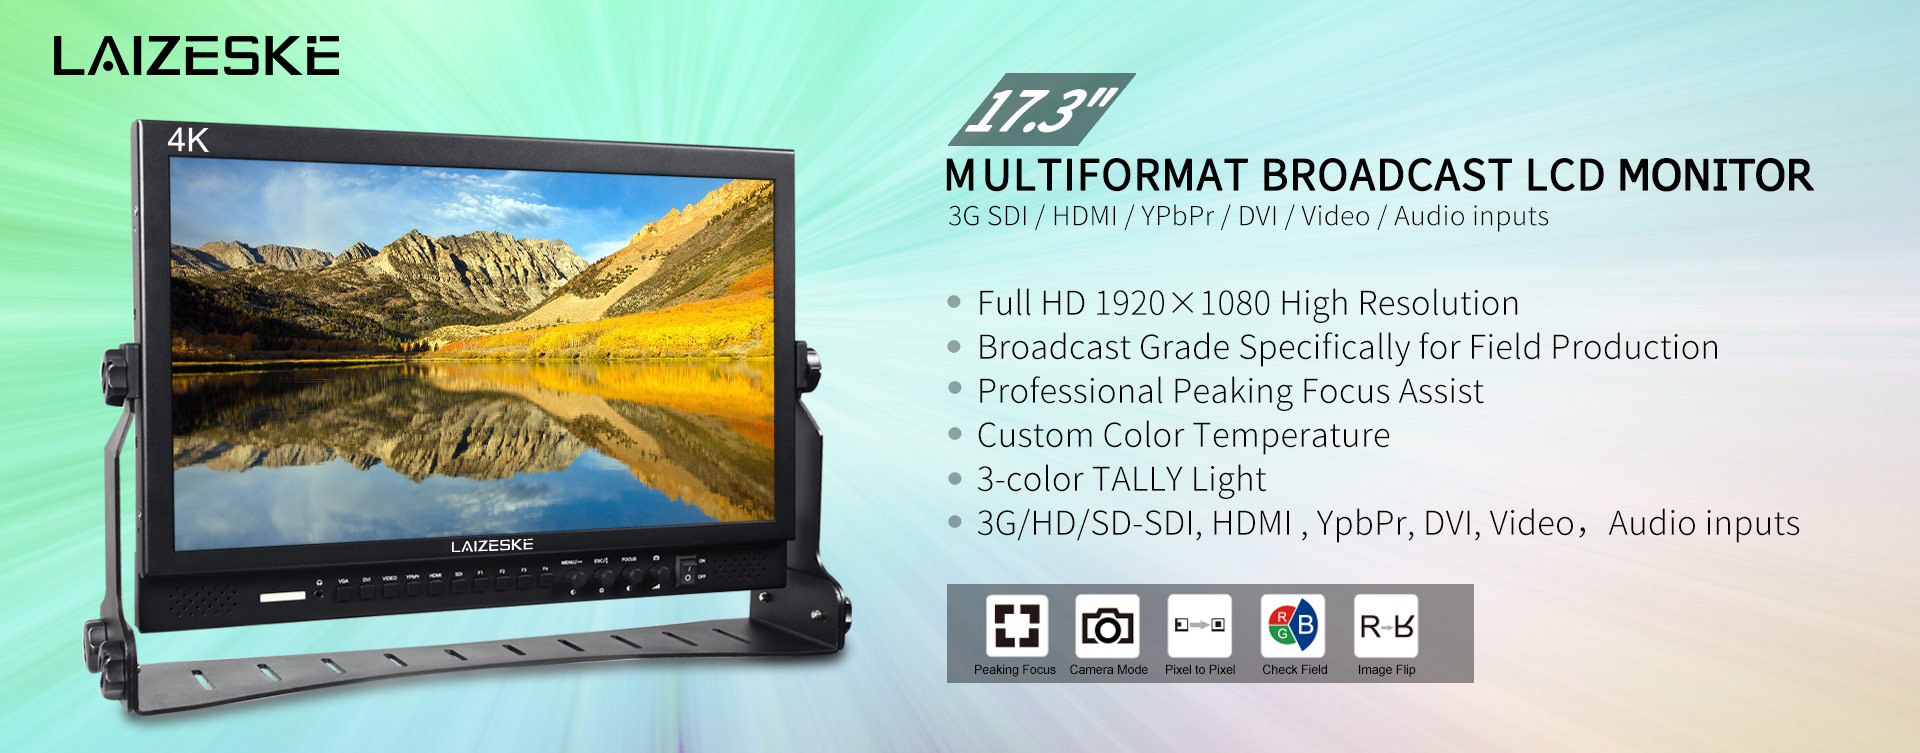 173-inch-Broadcast-Grade-monitor-Specifically-for-Field-Production